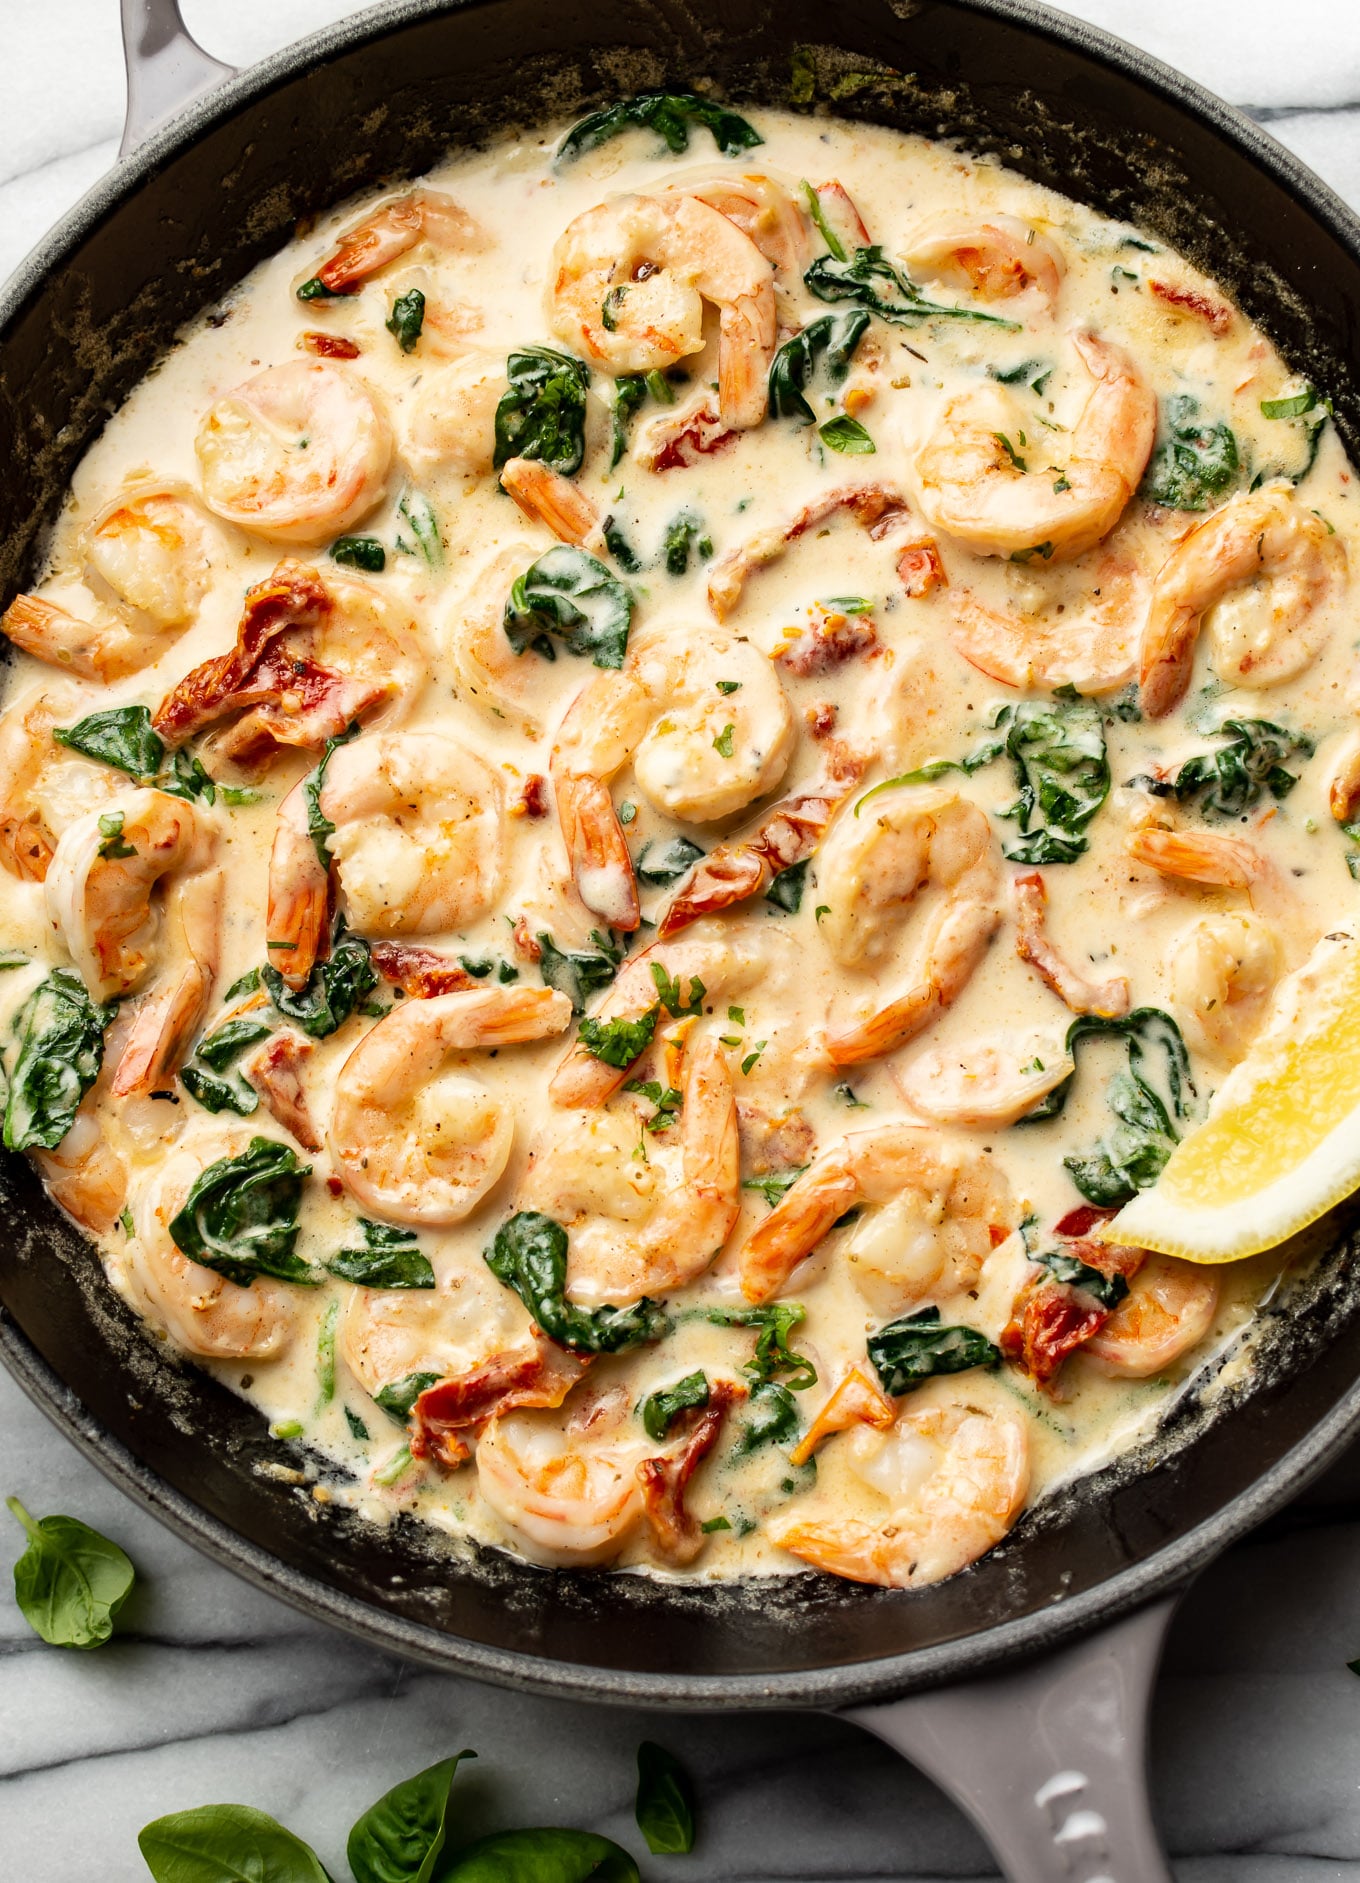 Perfect Seared Shrimp with Garlic and Herbs - The Real Recipes